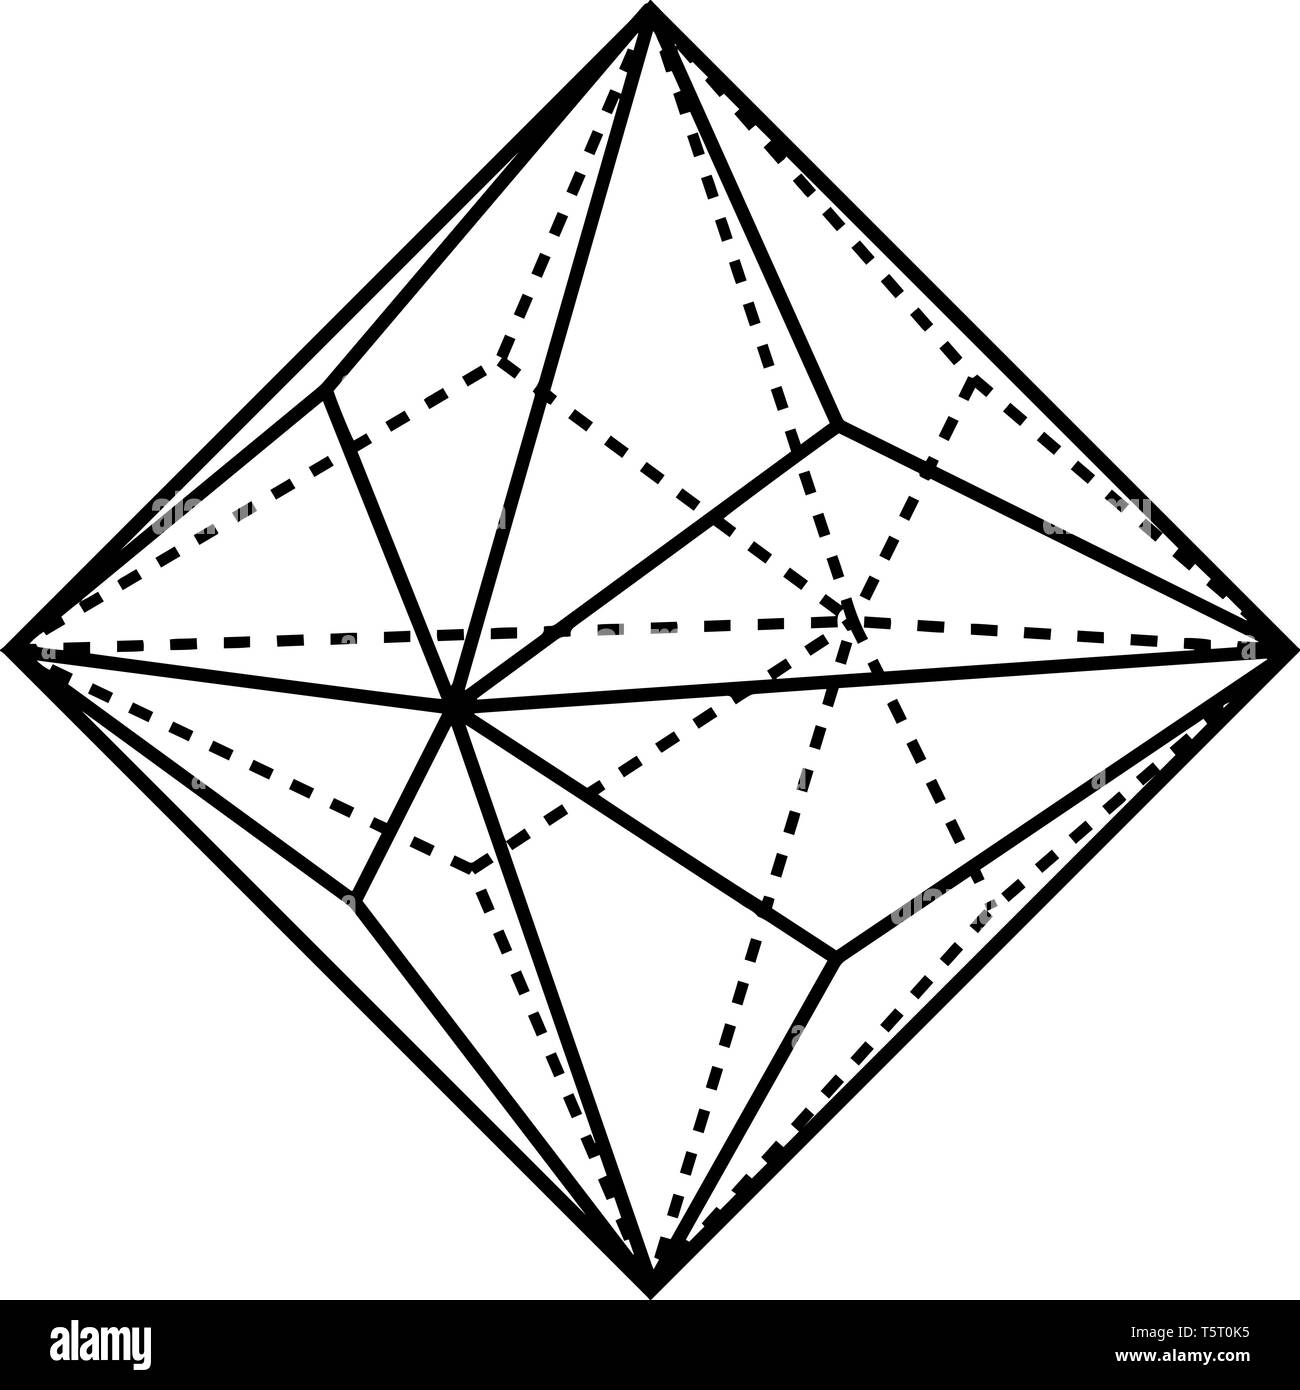 A twenty-four sided geometrical shape called Triakisoctahedron. It can be seen as an octahedron with triangular pyramids added to each face, vintage l Stock Vector